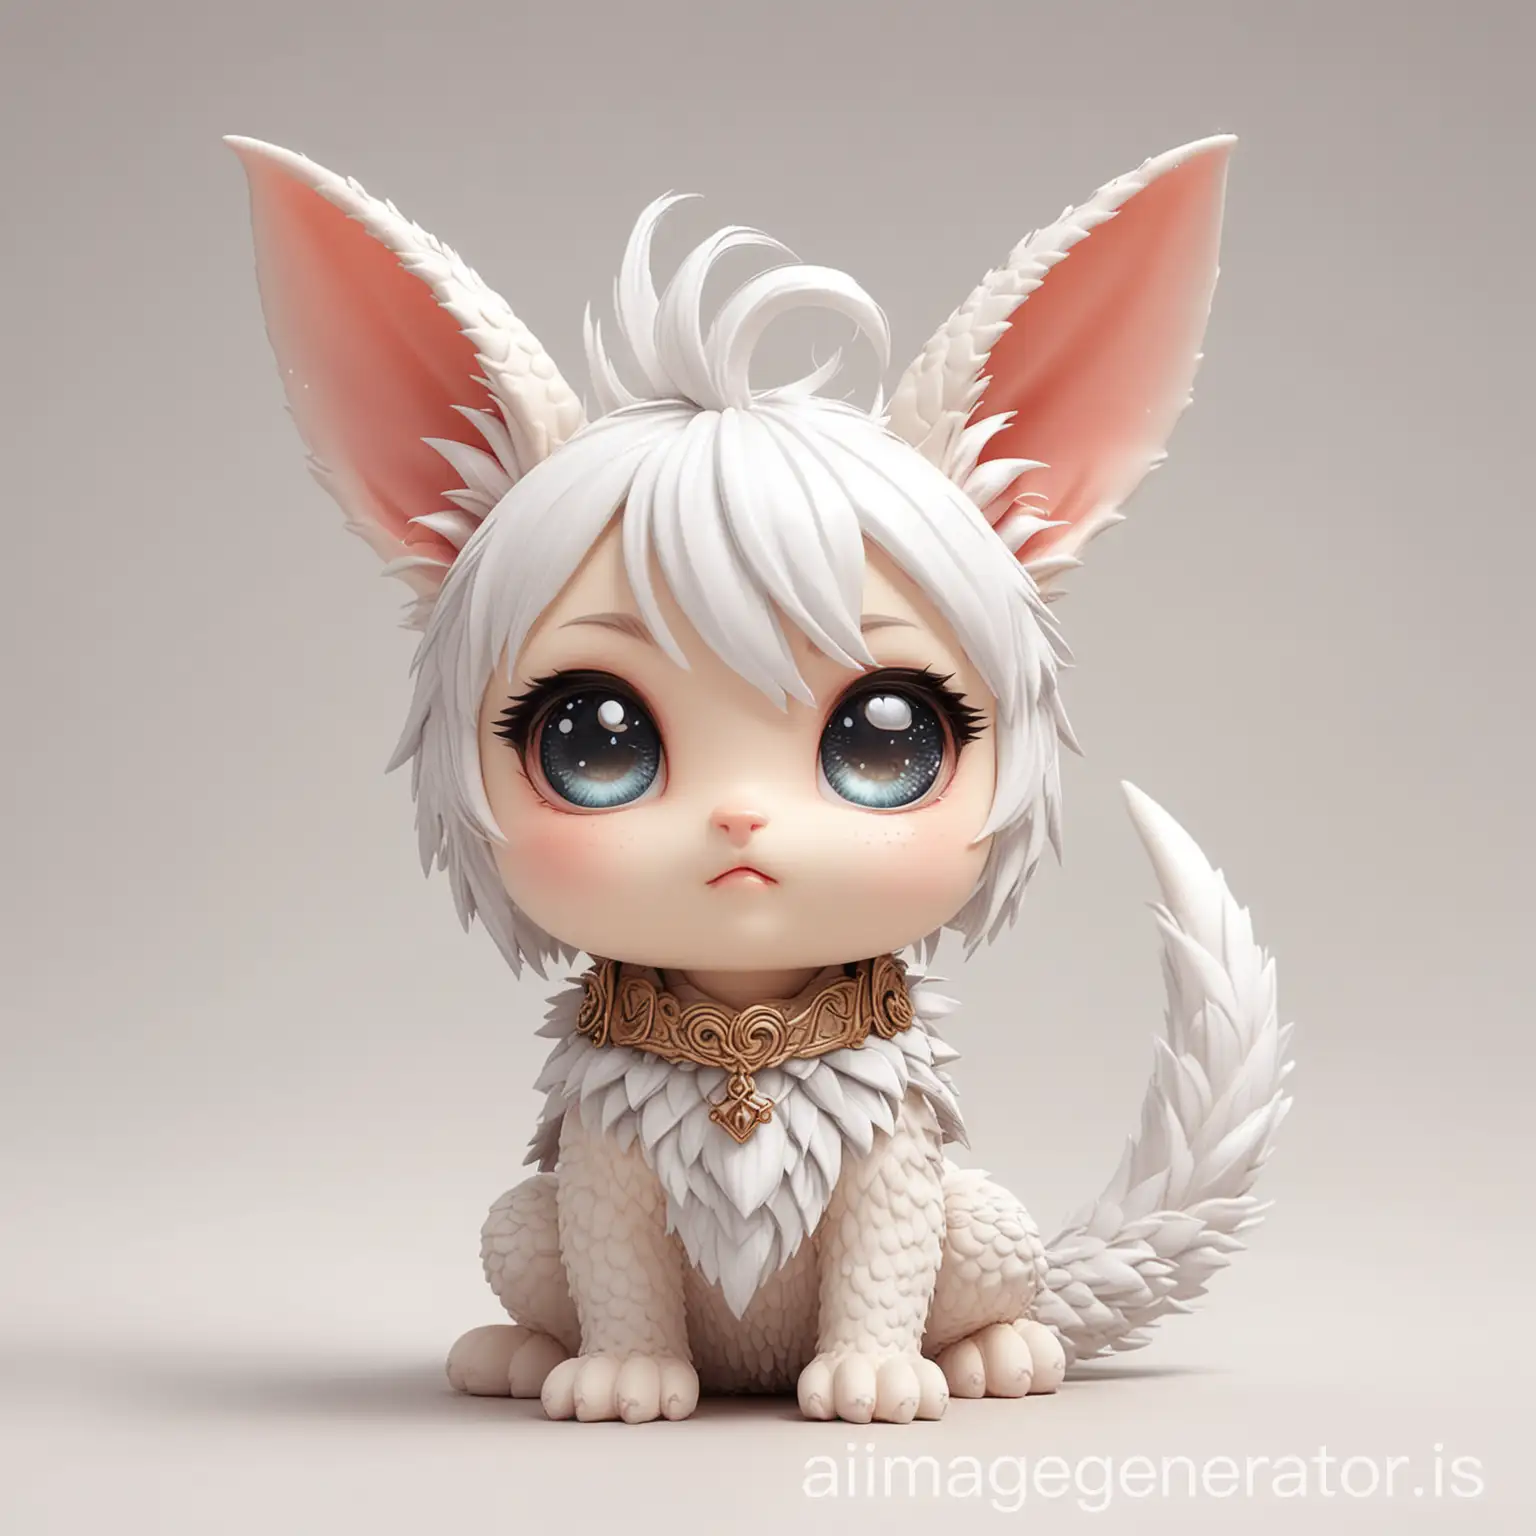 Chibi-Style-Art-Toys-Cute-Kitten-with-Bunny-Ears-and-Dragon-Tail